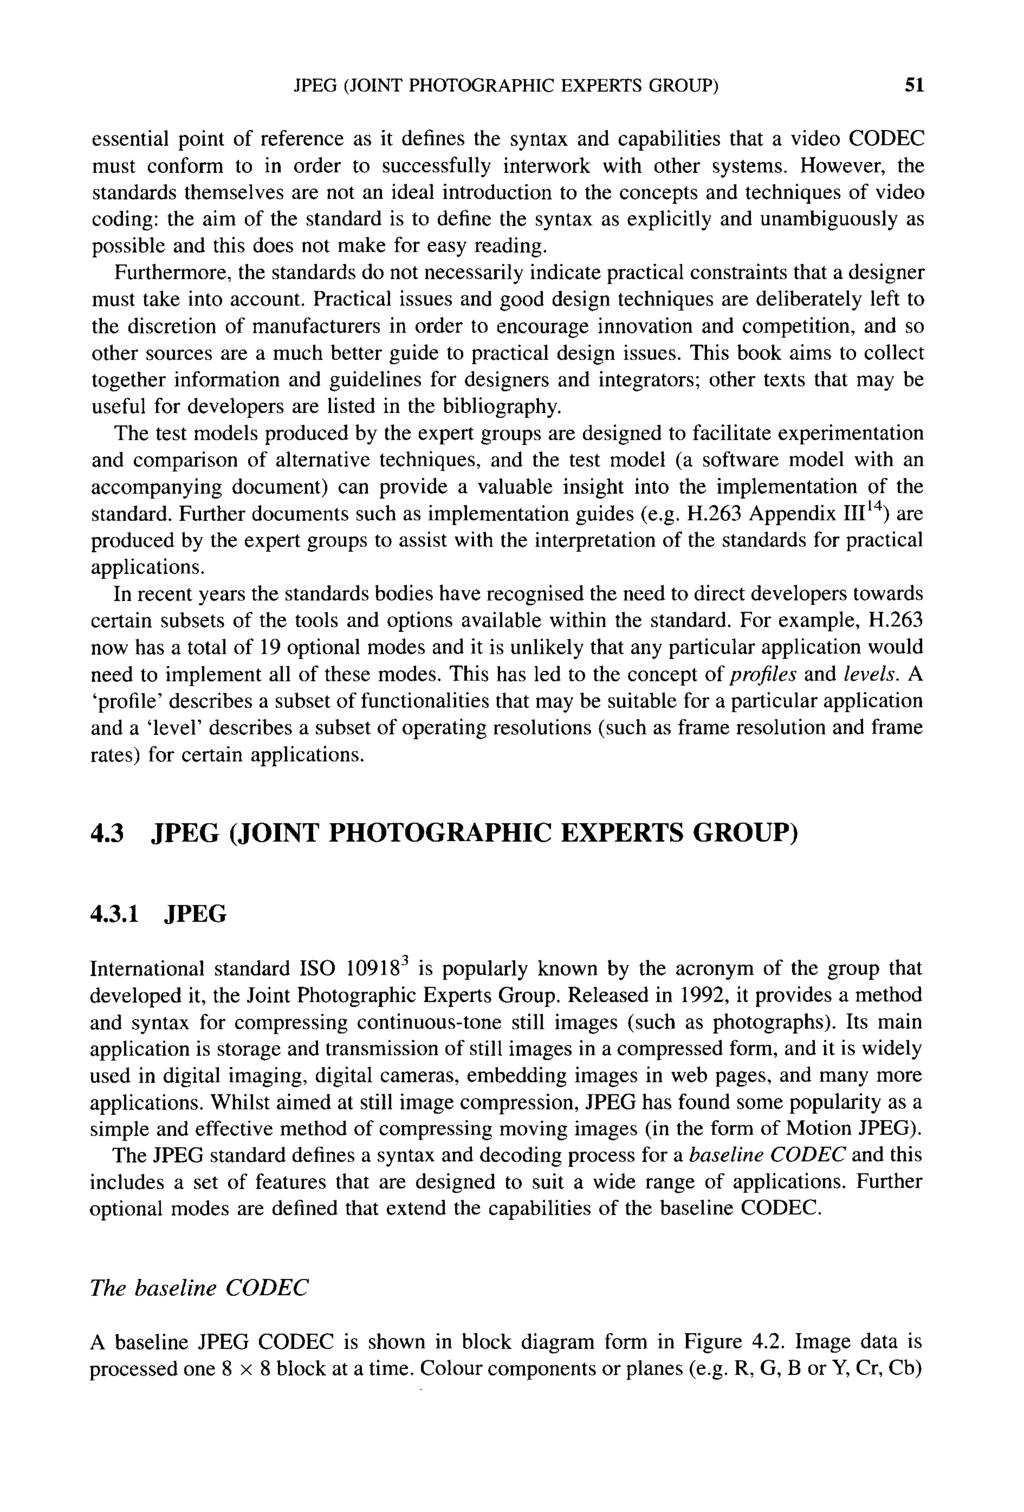 JPEG (JOINT PHOTOGRAPHIC EXPERTS GROUP) 51 essential point of reference as it defines the syntax and capabilities that a video CODEC must conform to in order to successfully interwork with other